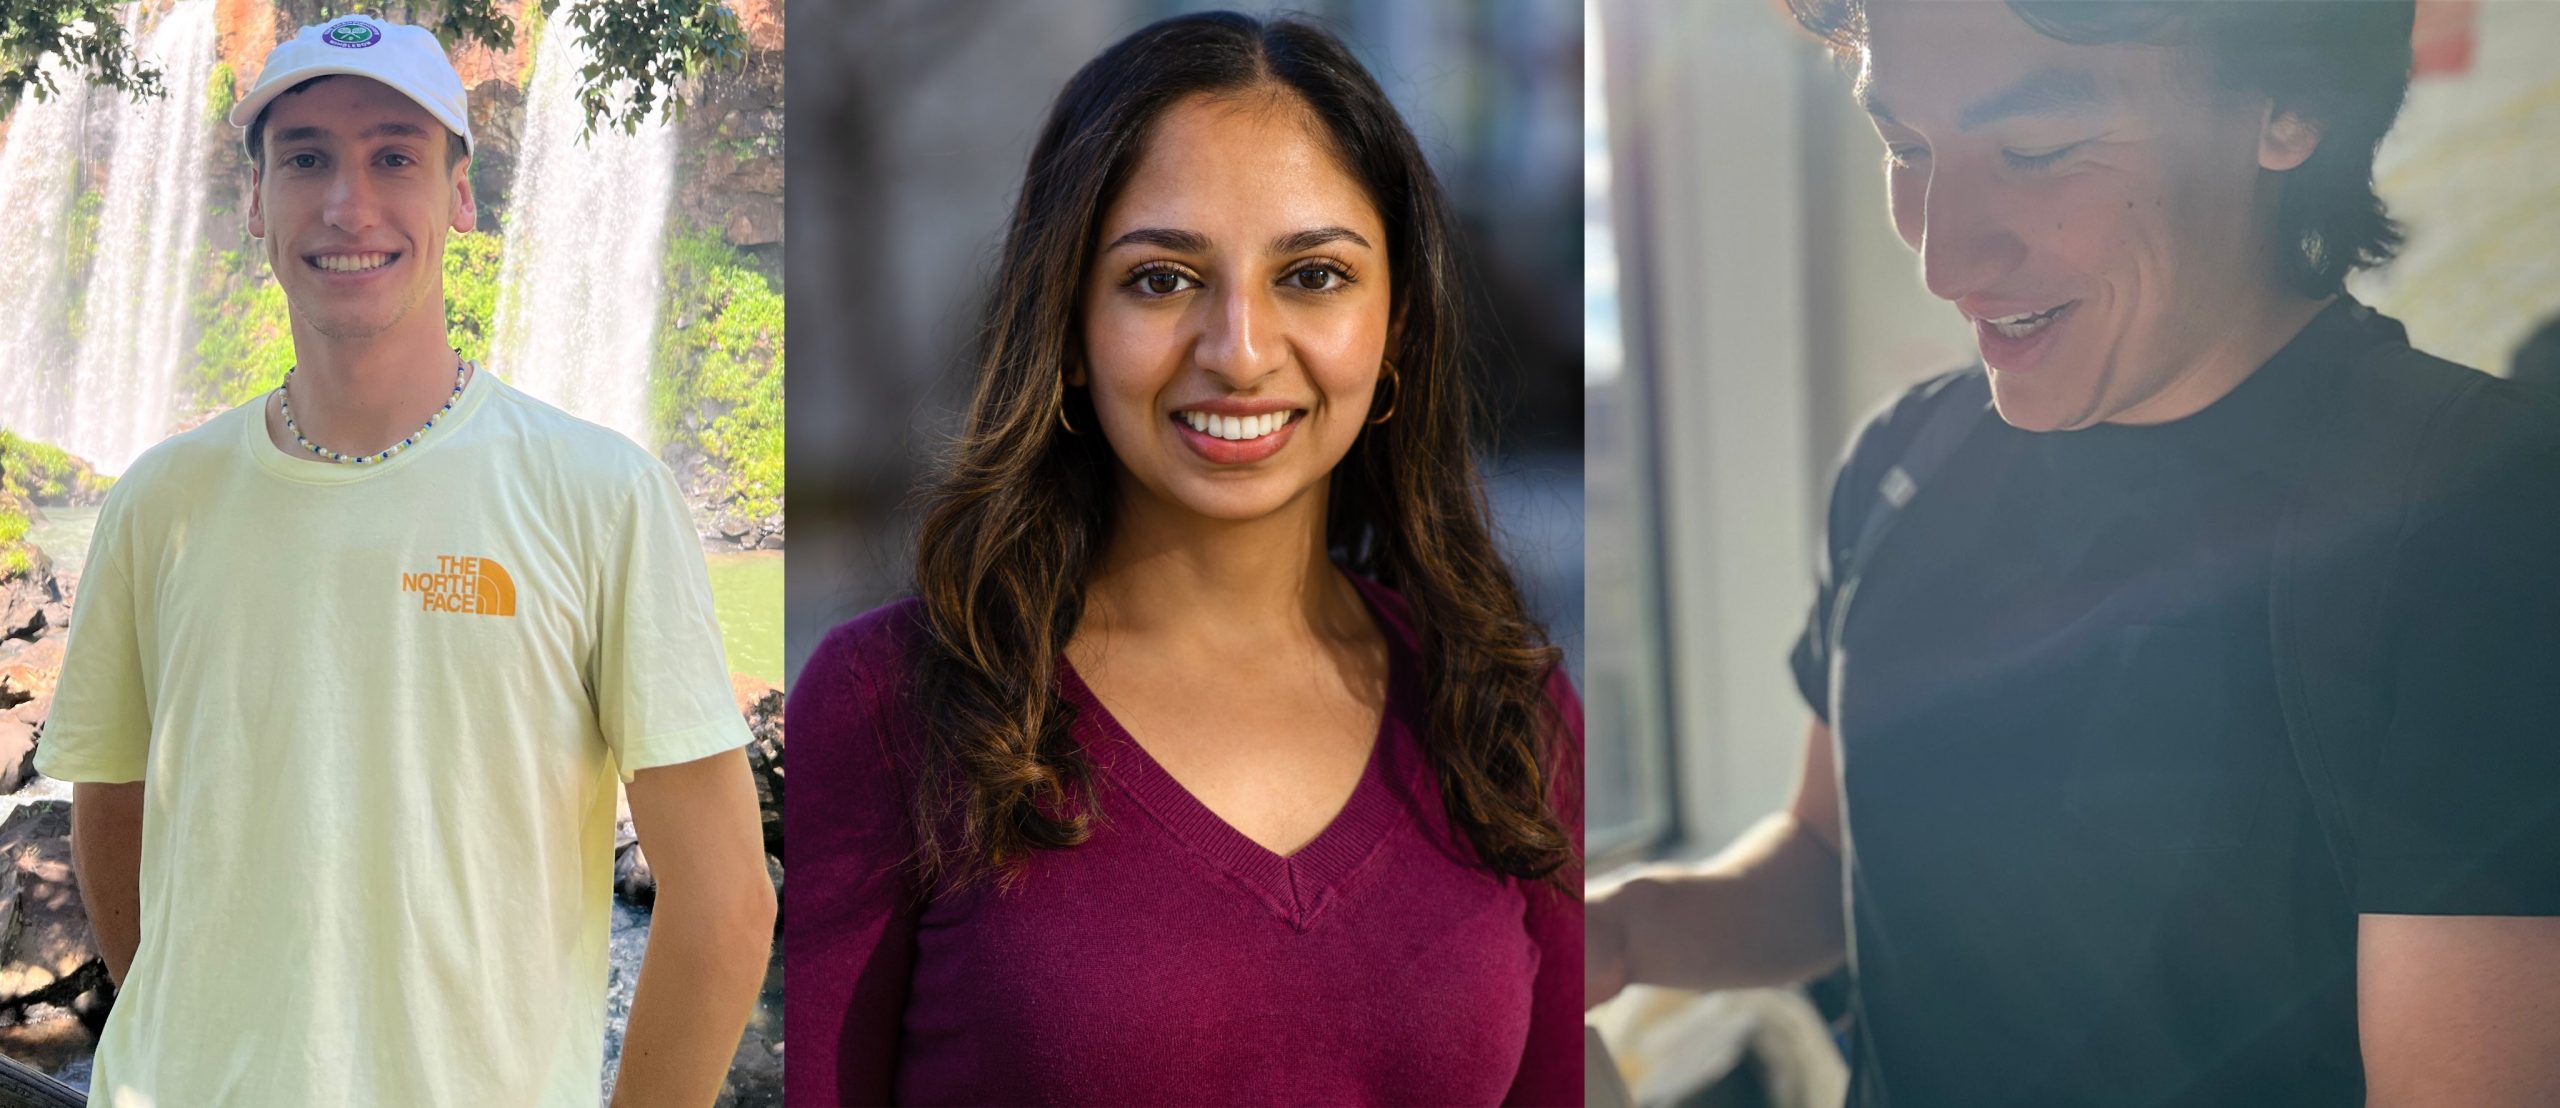 Congratulations to the Lit@MIT Class of 2023: Richter, Anjali, and Trevor!